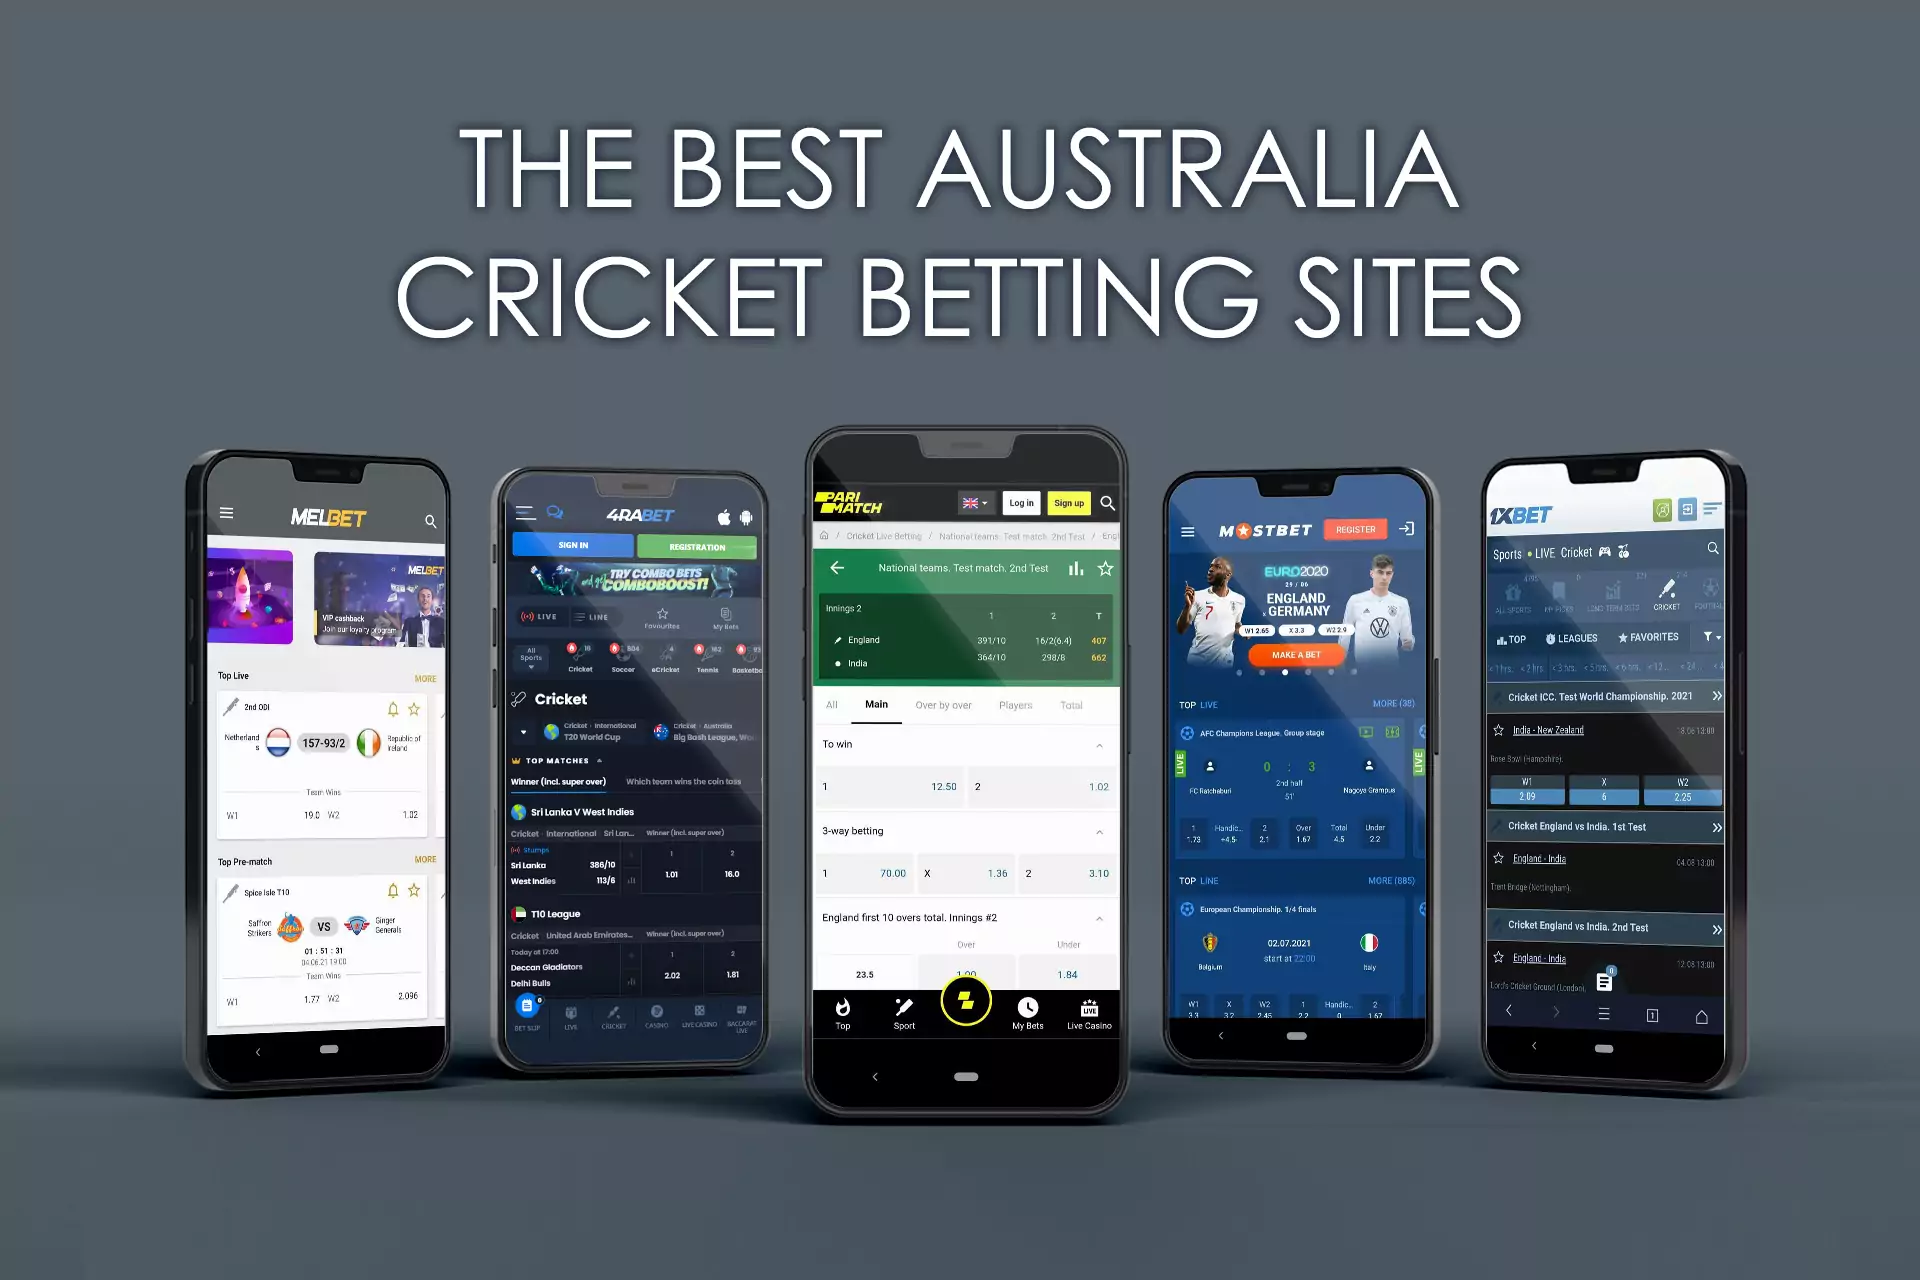 Choosing the best cricket betting site we pay attention to the license, payment methods, bonus offers, and so on.